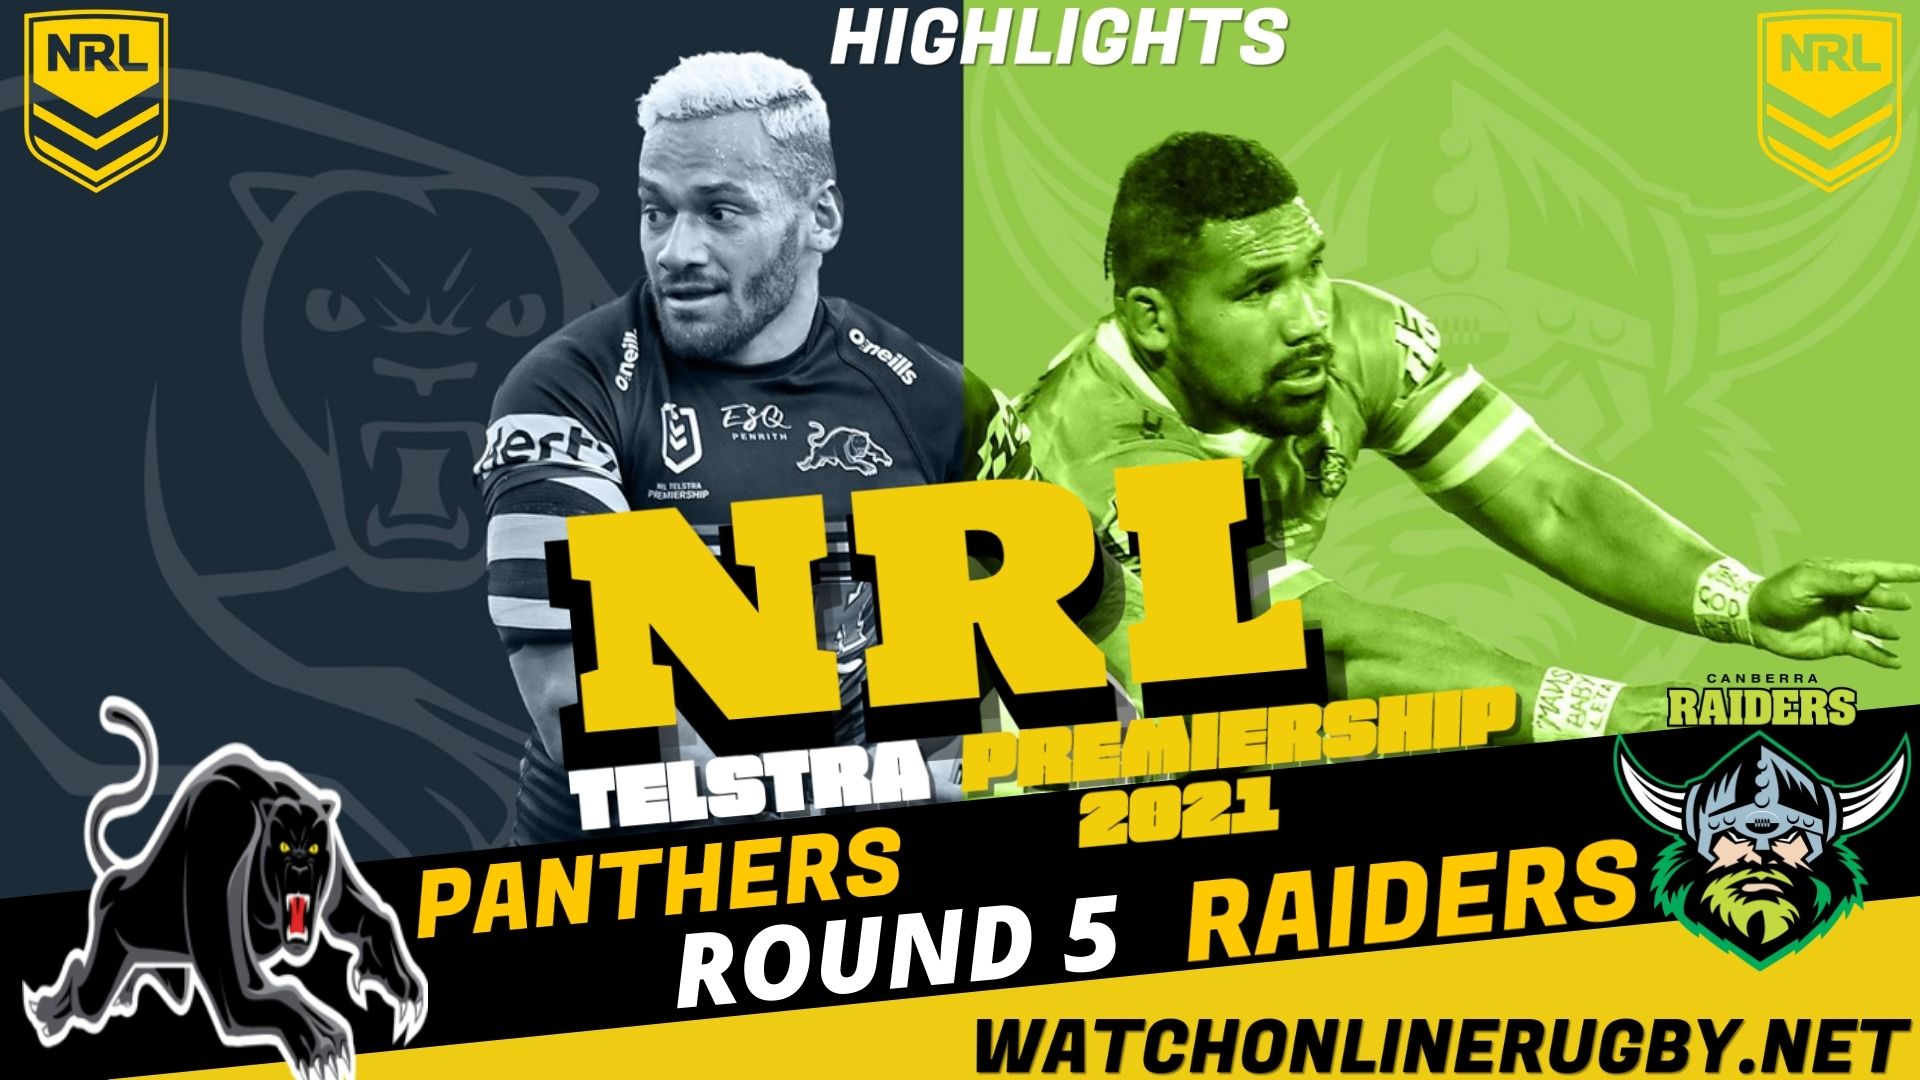 Panthers Vs Raiders Highlights RD 5 NRL Rugby